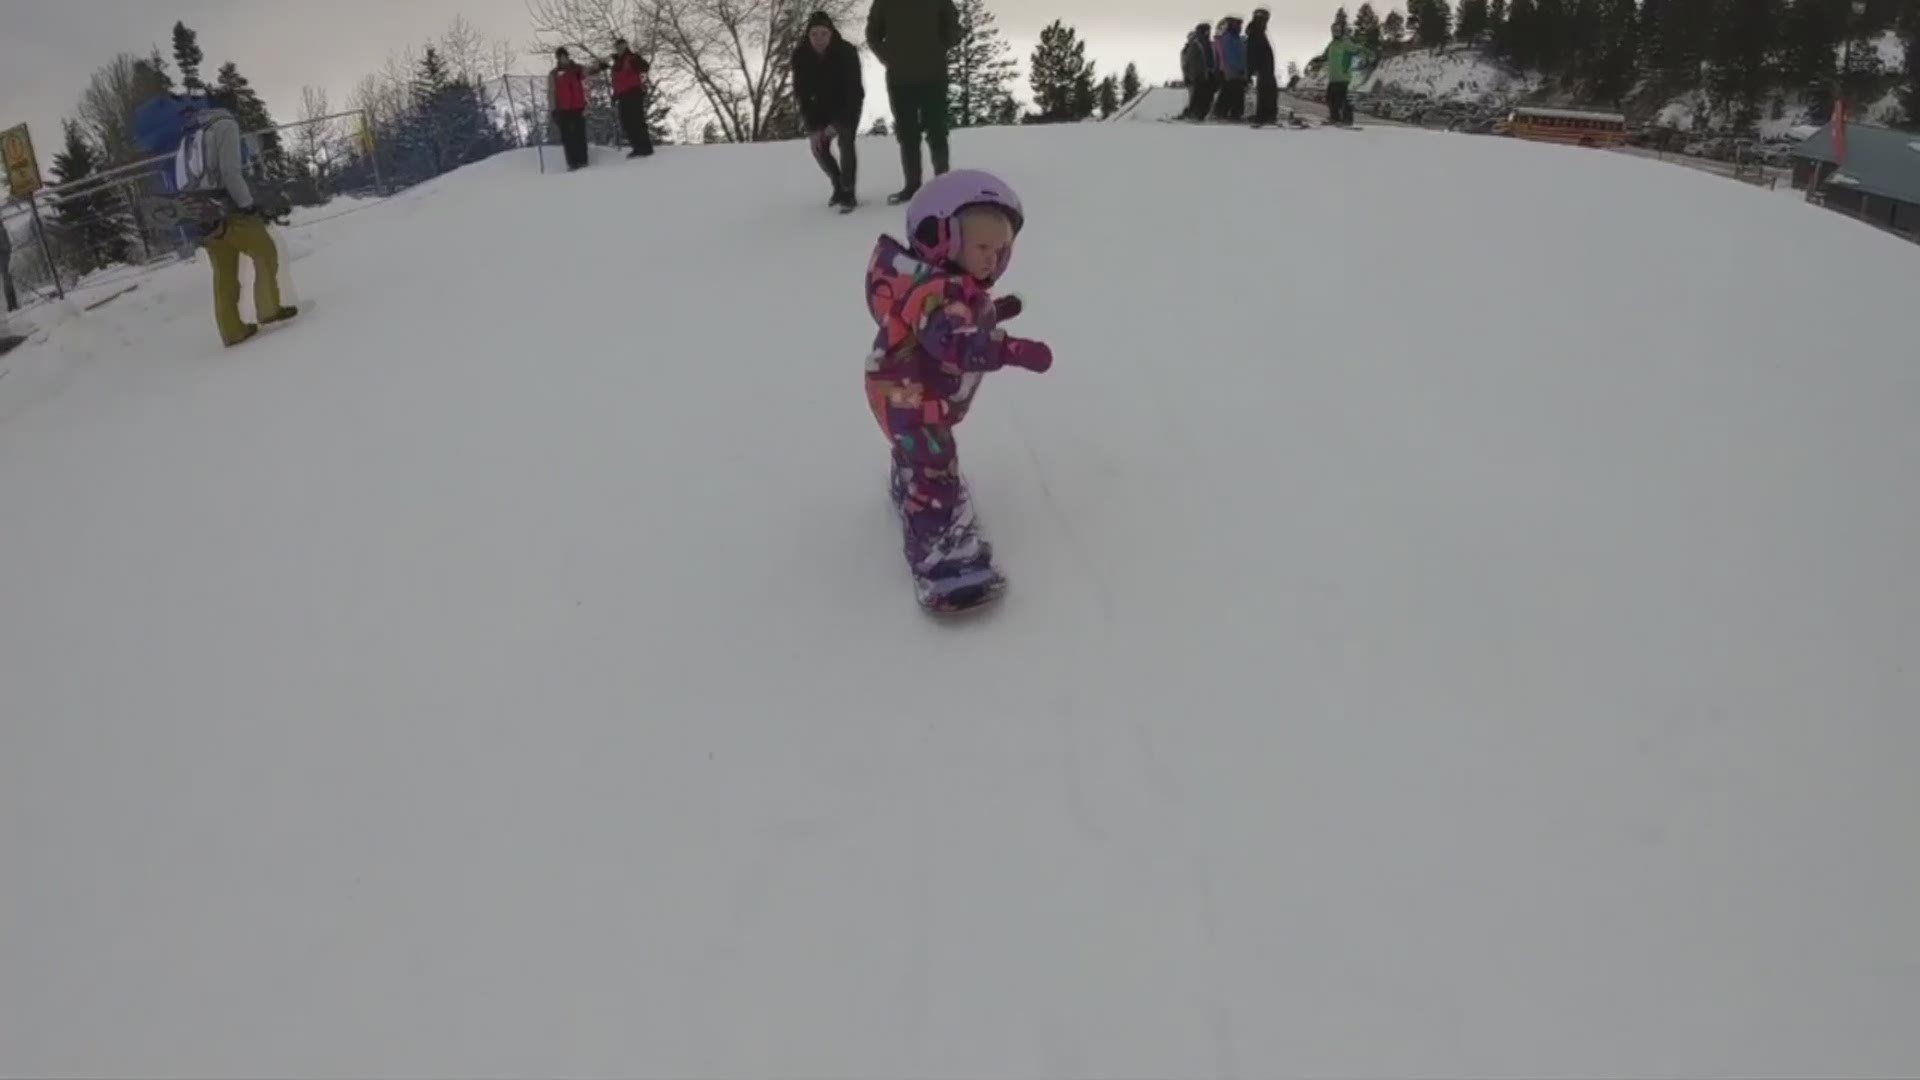 Cash Rowley became an internet sensation after her father posted video of her snowboarding at Bogus Basin for her first birthday. The little girl was back at Bogus for her second birthday on Sunday, December 9, 2018. Video courtesy Nick Rowley.